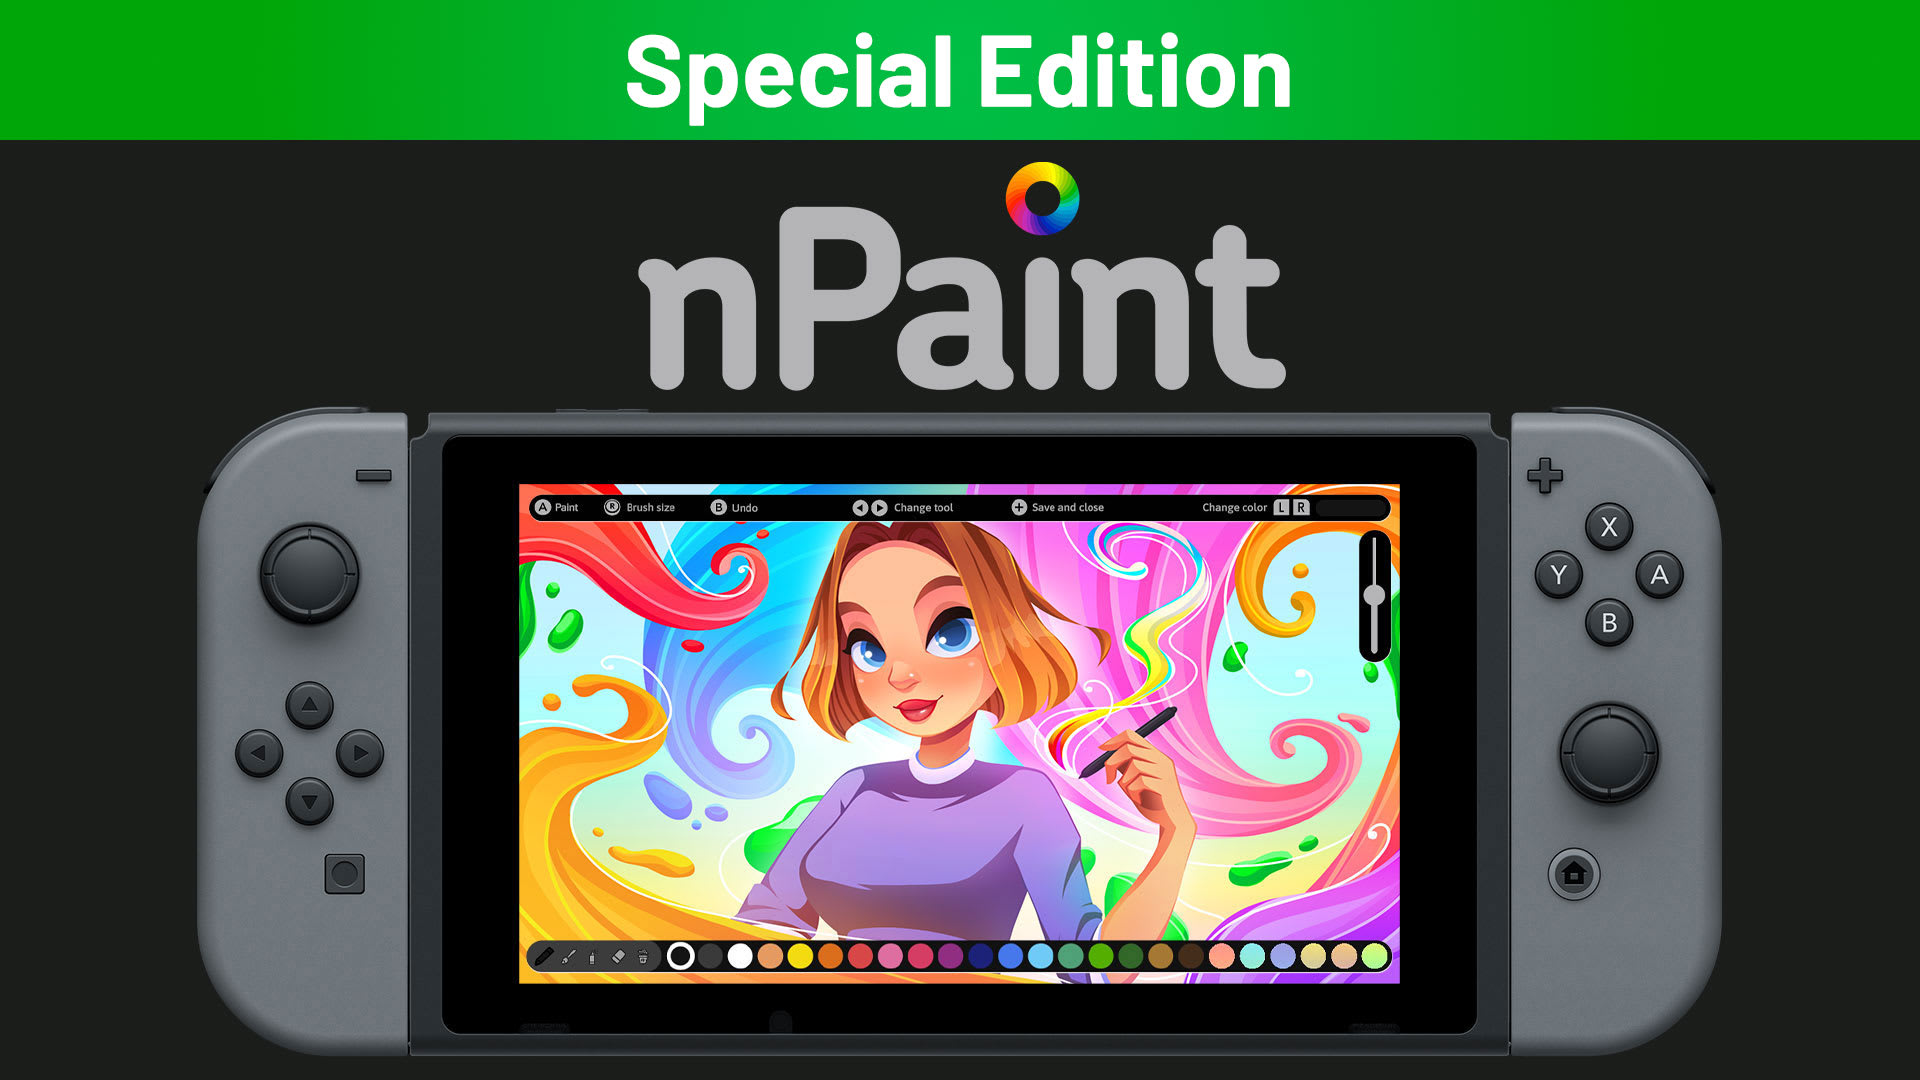 nPaint Special Edition